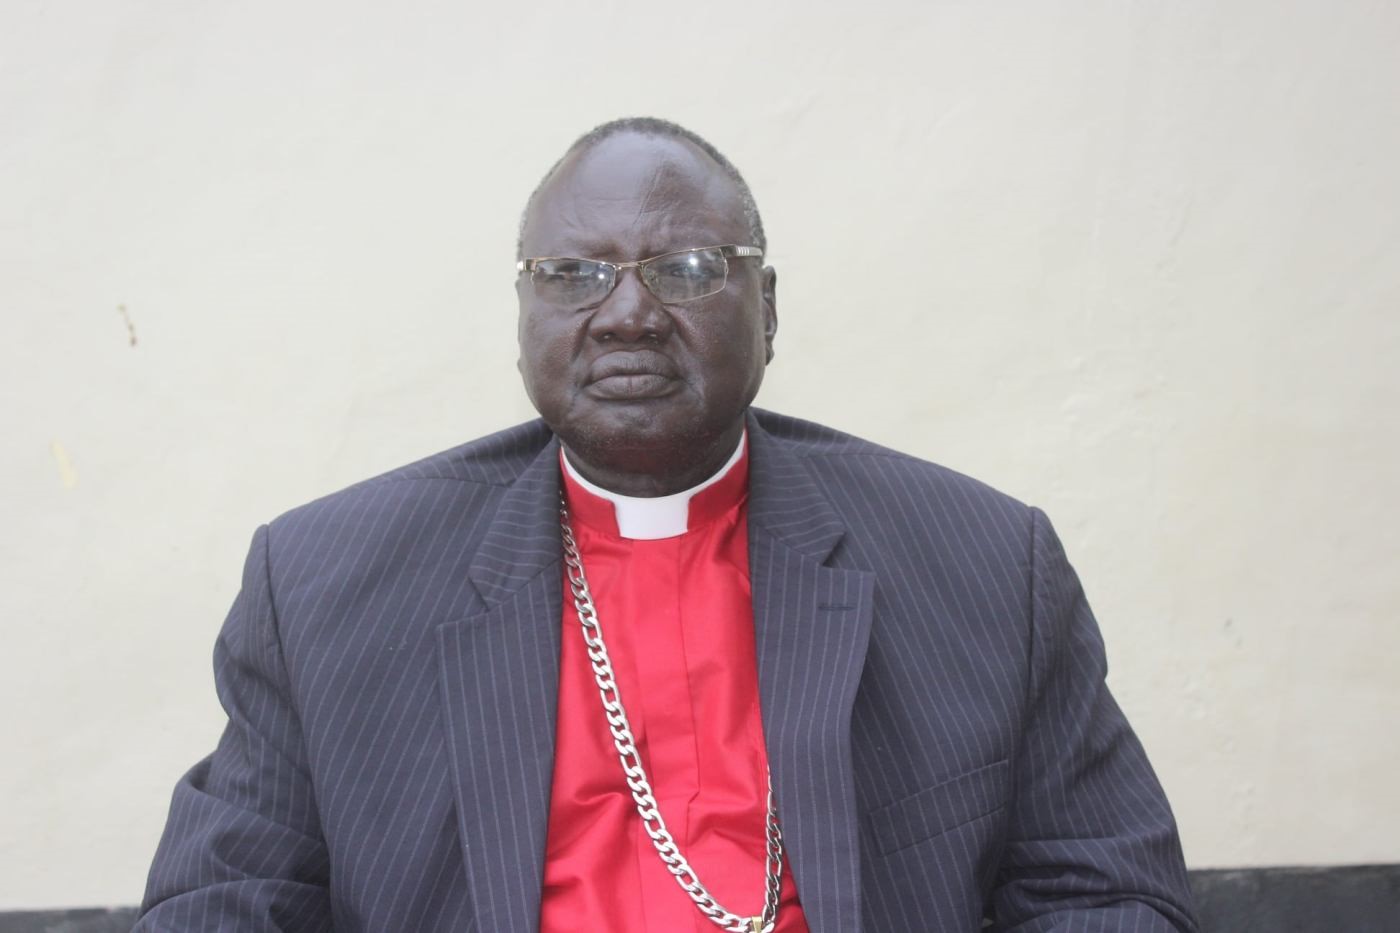 Akurdit, Anur trade accusations over church violence in Uganda